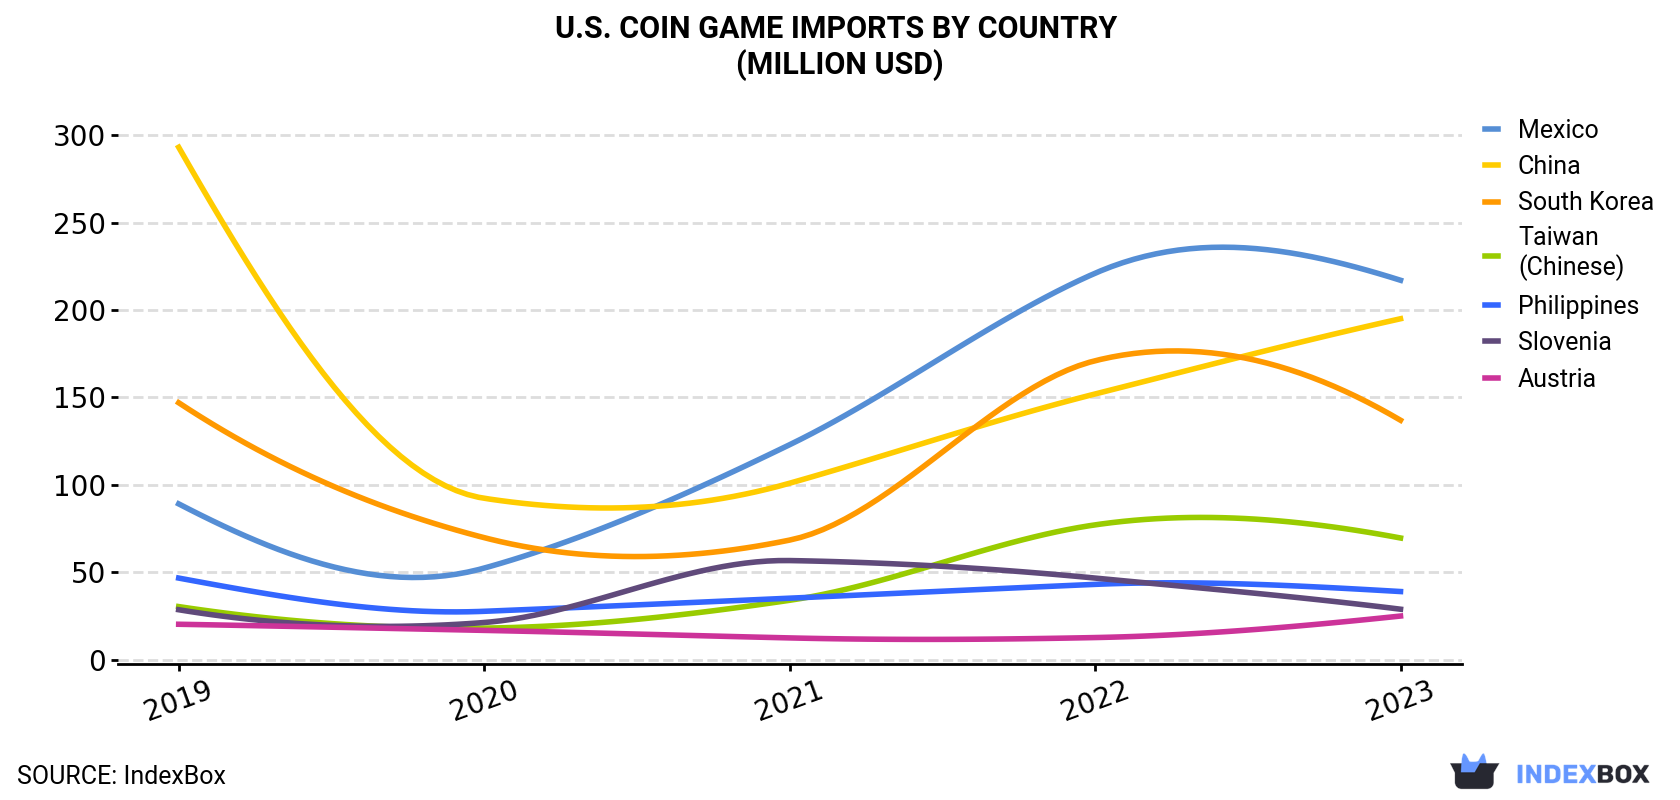 U.S. Coin Game Imports By Country (Million USD)